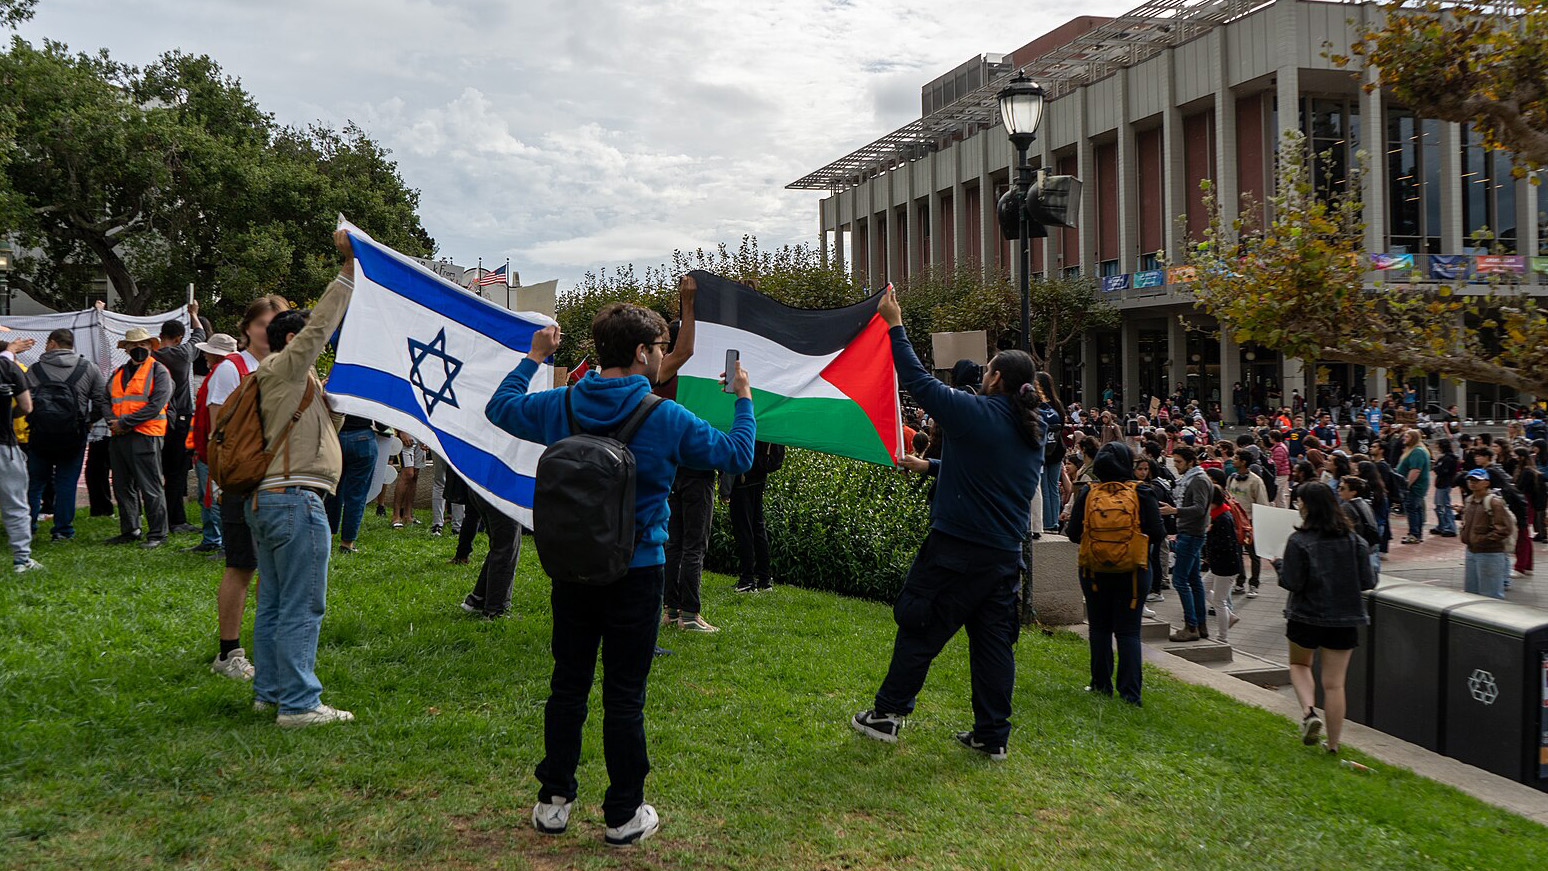 Two students hold an Israeli flag and two students hold up a Palestinian flag standing next to one another on the Berkeley campus with at least one hundred students on Sproul Plaza in the background